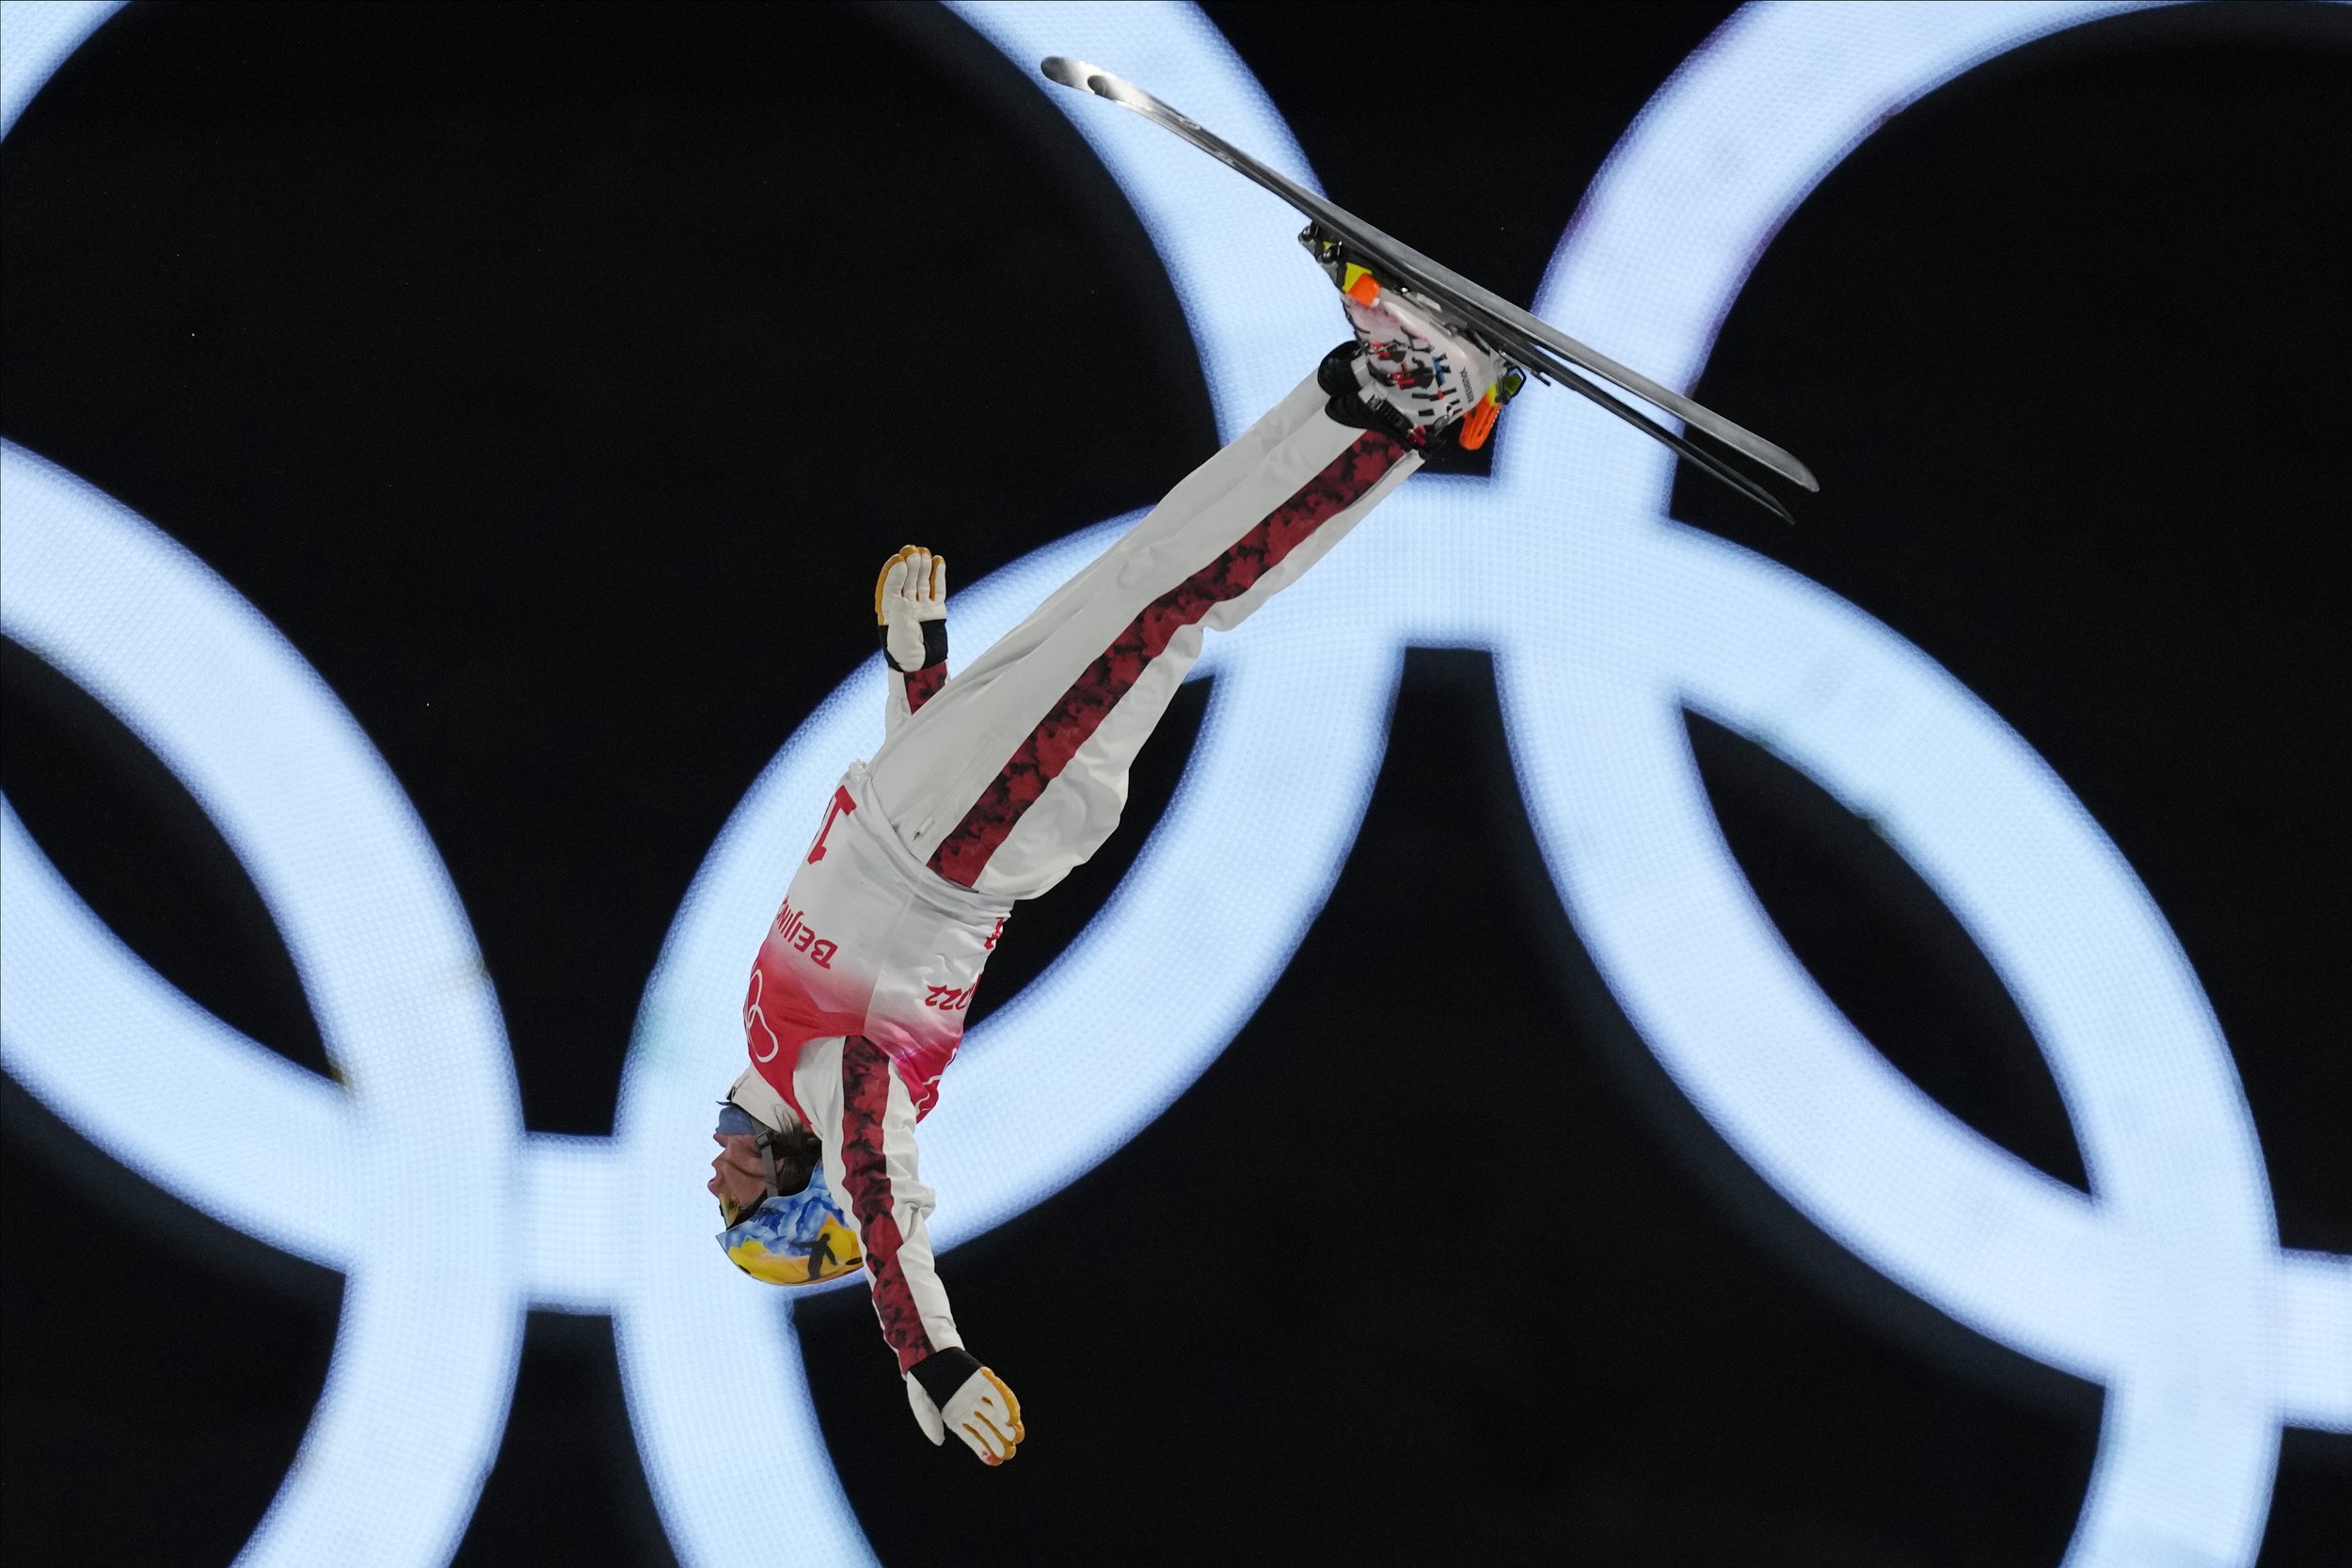  Canada's Miha Fontaine competes during the men's aerials qualification at the 2022 Winter Olympics, Tuesday, Feb. 15, 2022, in Zhangjiakou, China. (AP Photo/Lee Jin-man) 